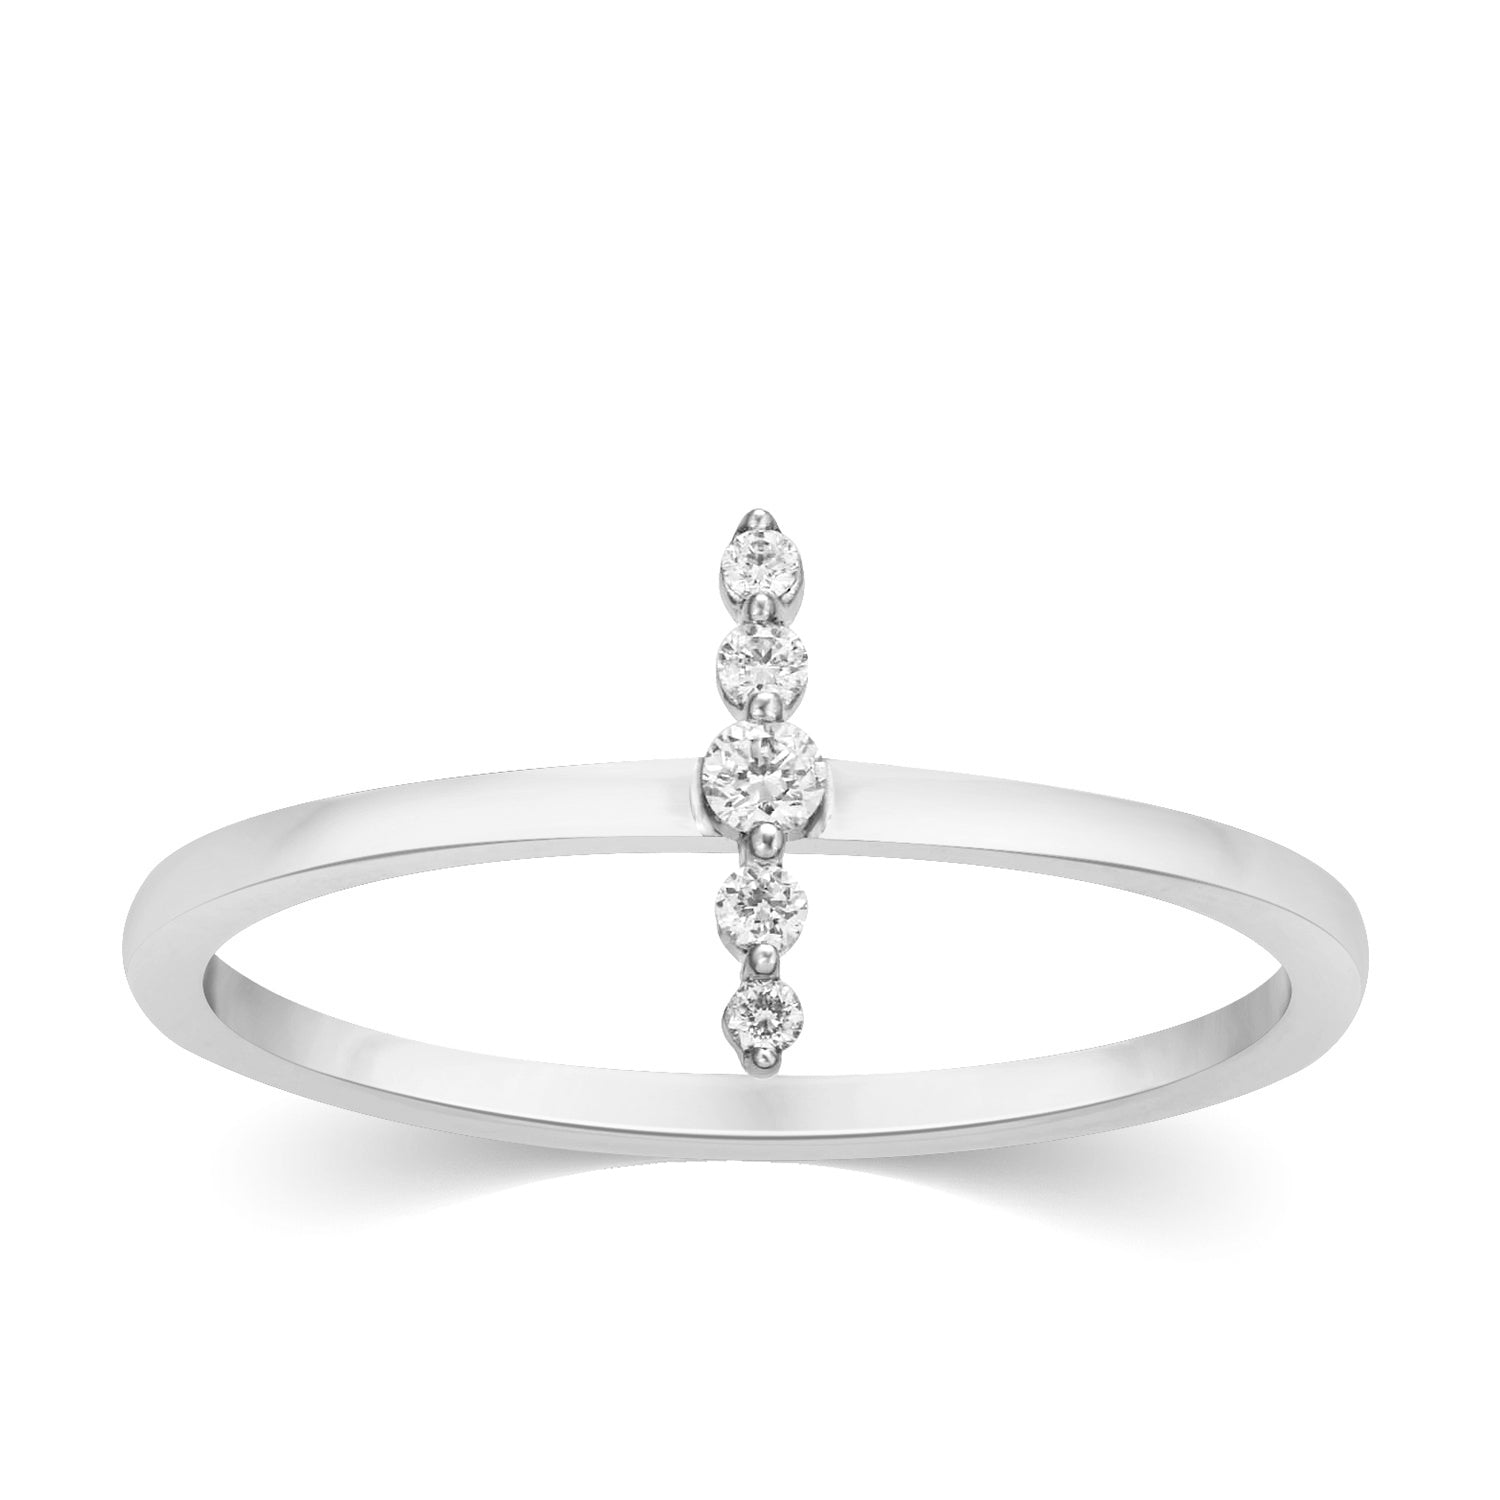 Wedding Band Ring With 0.06 Carat TW Of Diamonds In 10K White Gold